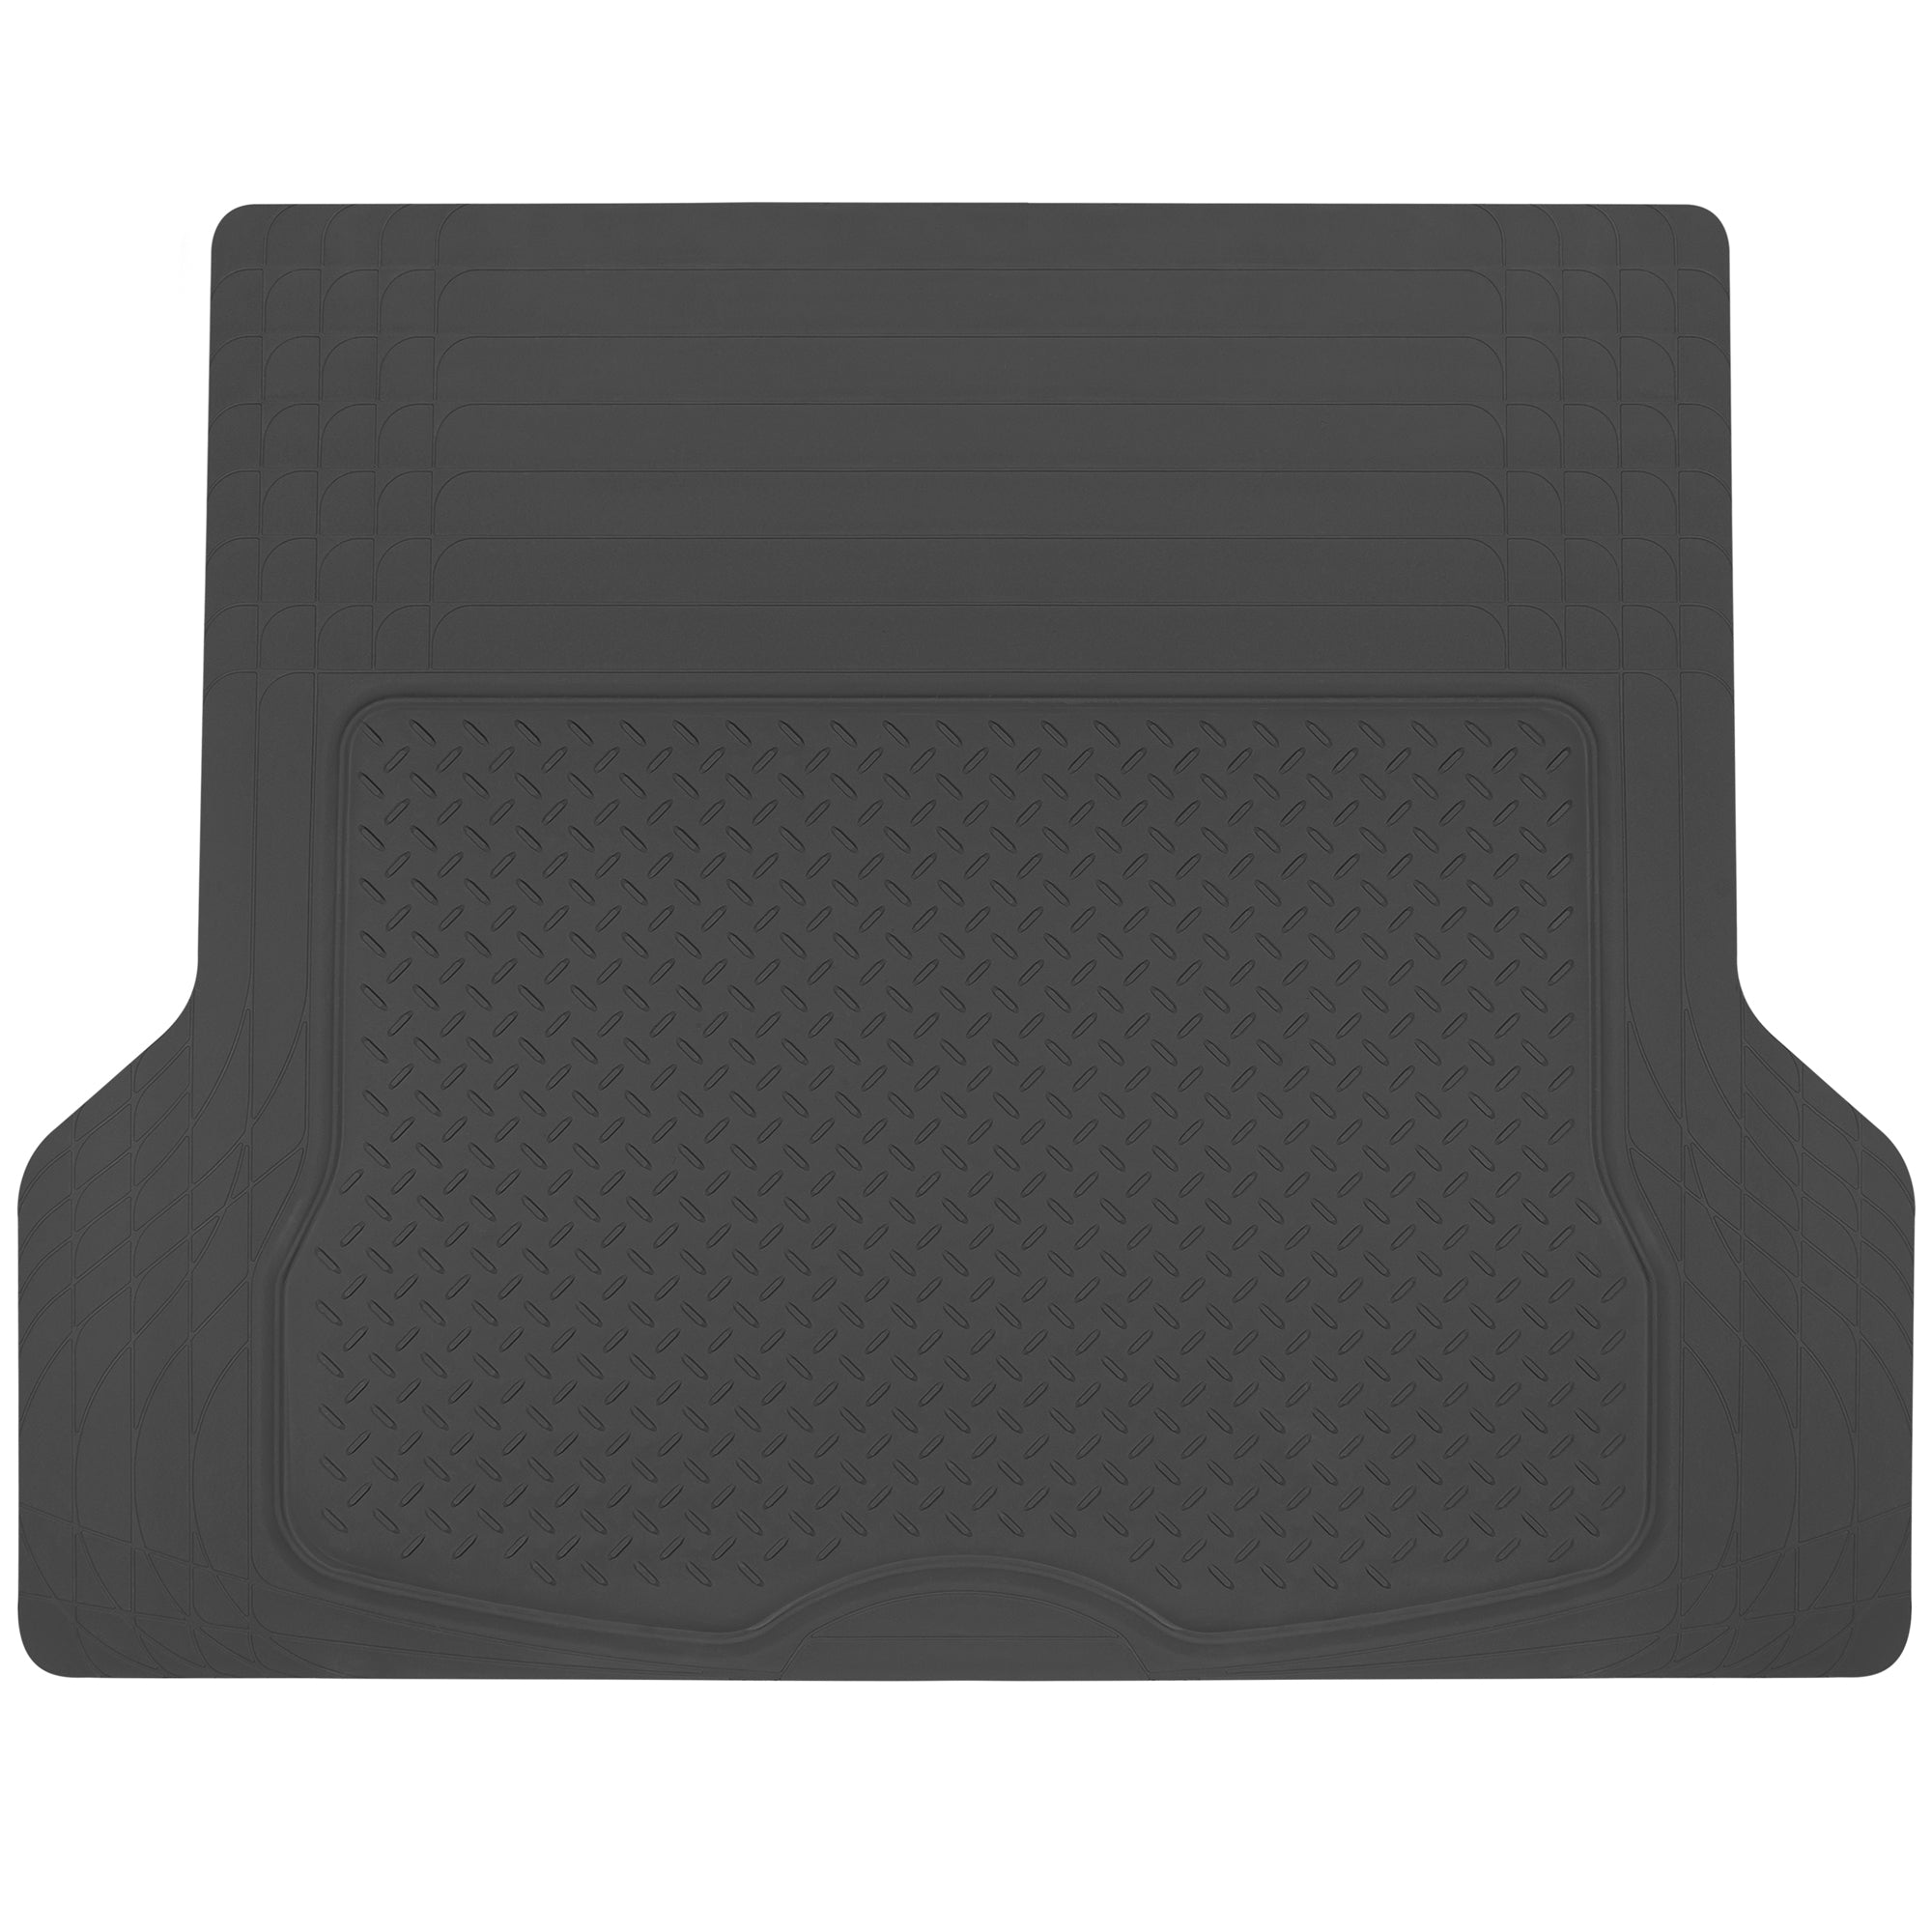 BDK-MT-785 Heavy Duty Cargo Liner Floor Mat-All Weather Trunk Protection, Trimmable to Fit & Durable HD Rubber Protection for Car SUV Sedan Auto - Black - Black:#000000